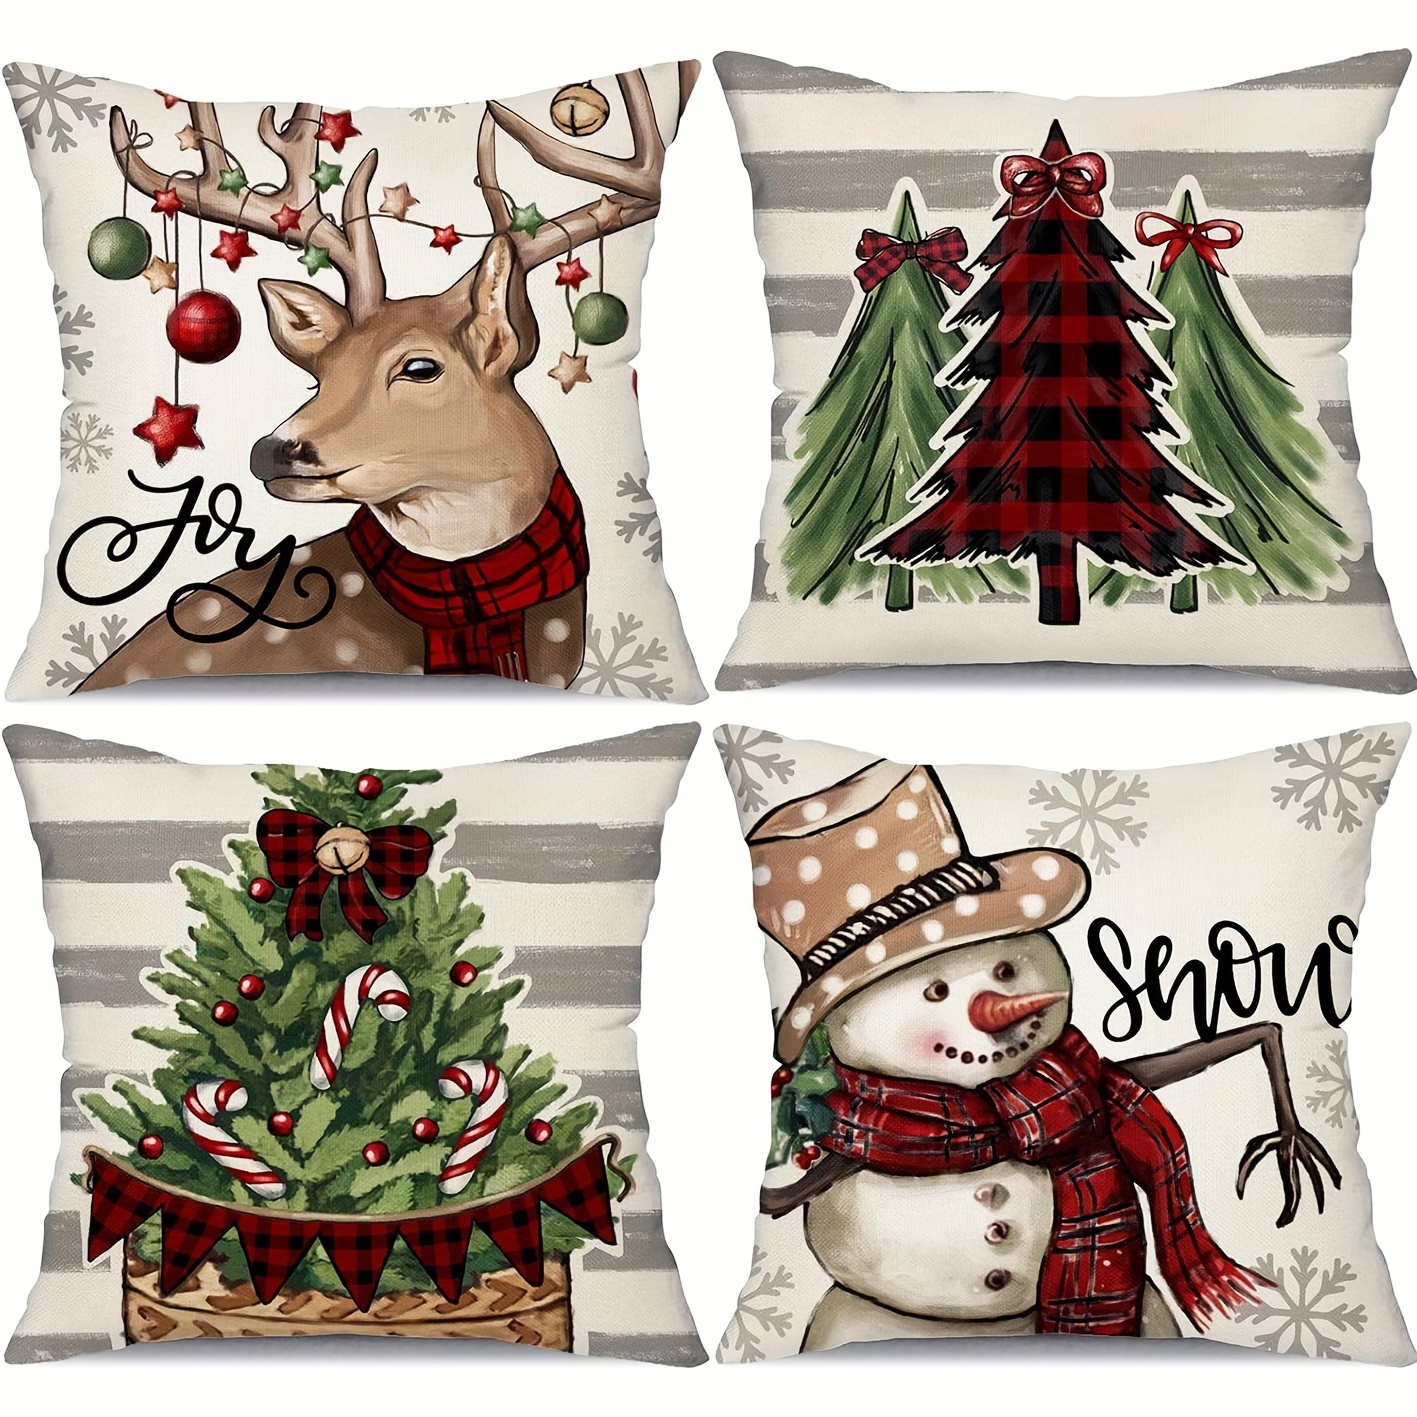 

4-piece Set Festive Christmas Pillow Covers 18x18 Inch - Snowman & Reindeer Design With Red & Black Plaid Scarf Accent, Linen Blend, Zip Closure - Perfect For Holiday Home & Sofa Decor